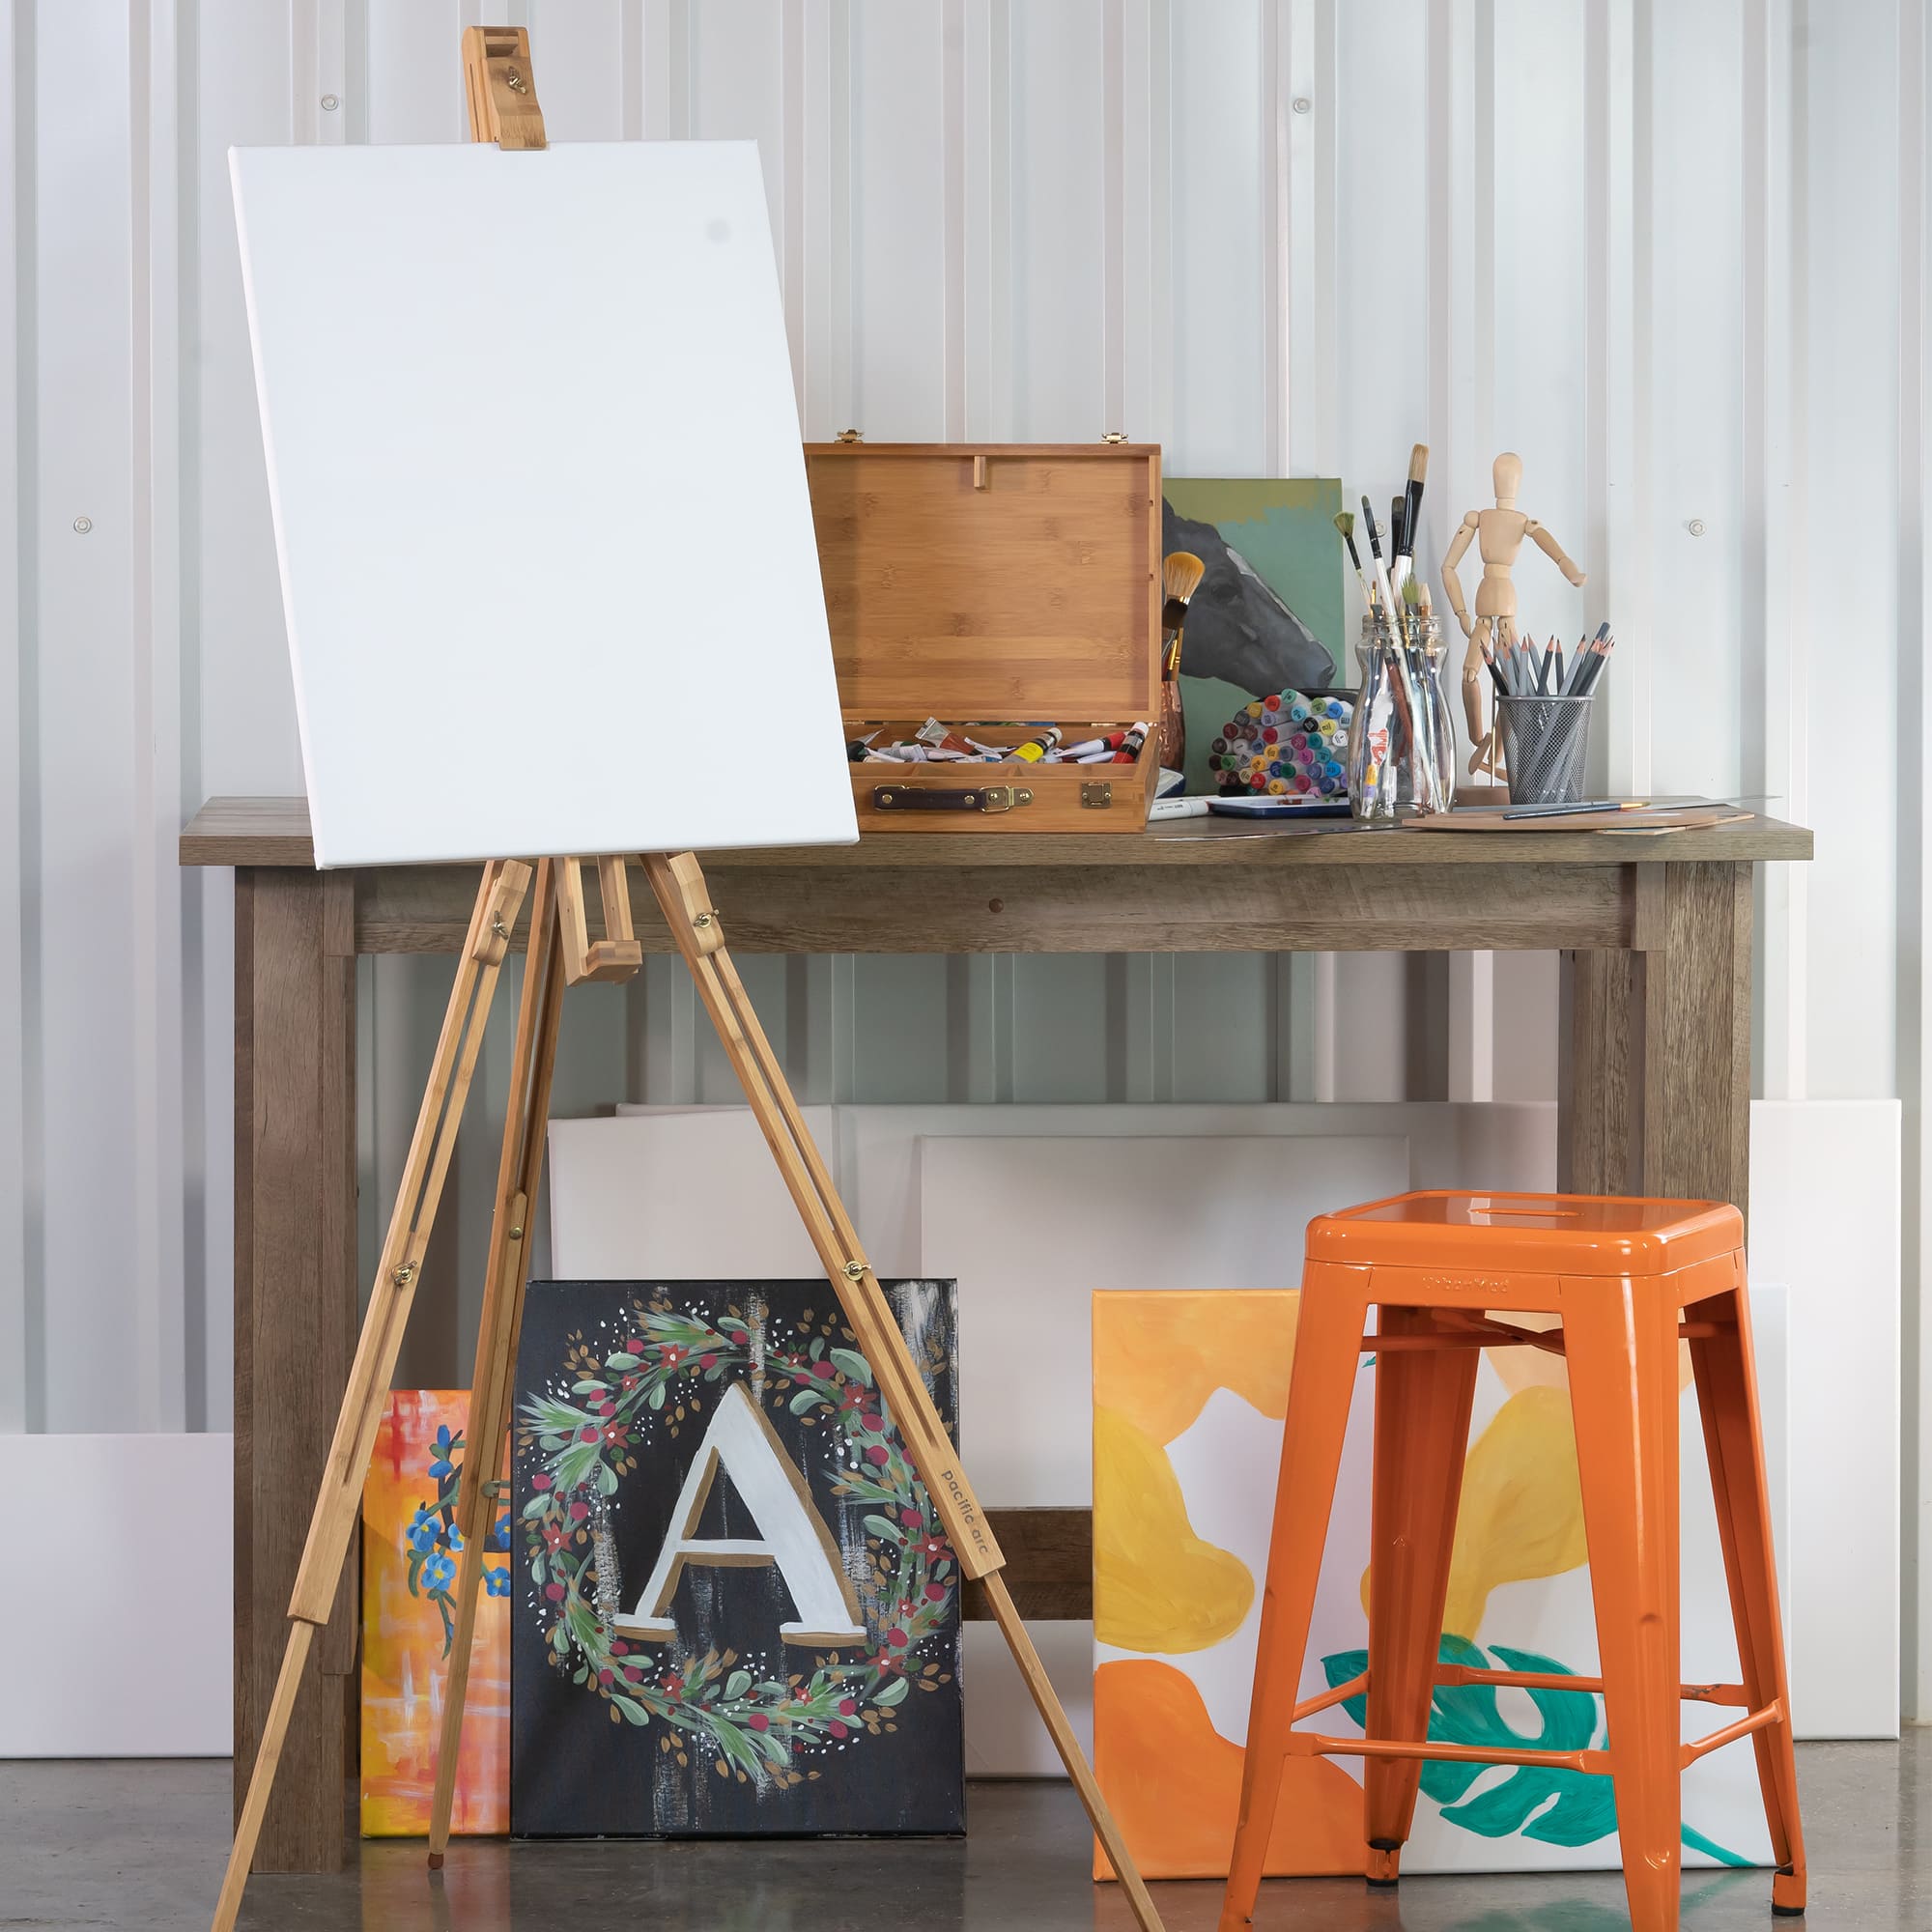 Pacific Arc Light Weight Travel Easel